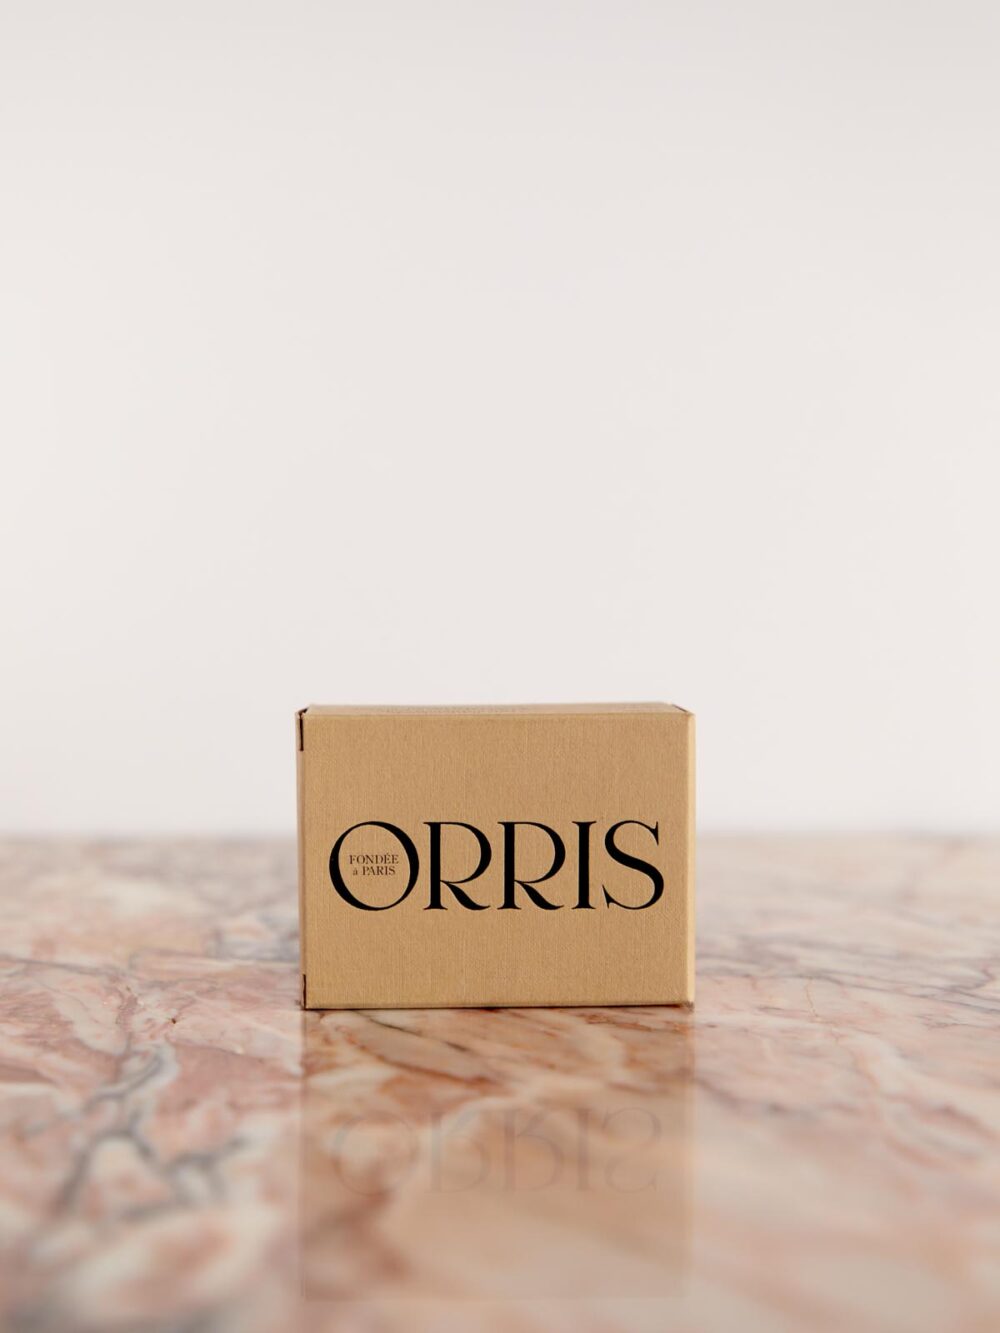 Le Botaniste - Cleansing Bar by Orris box on pink marble